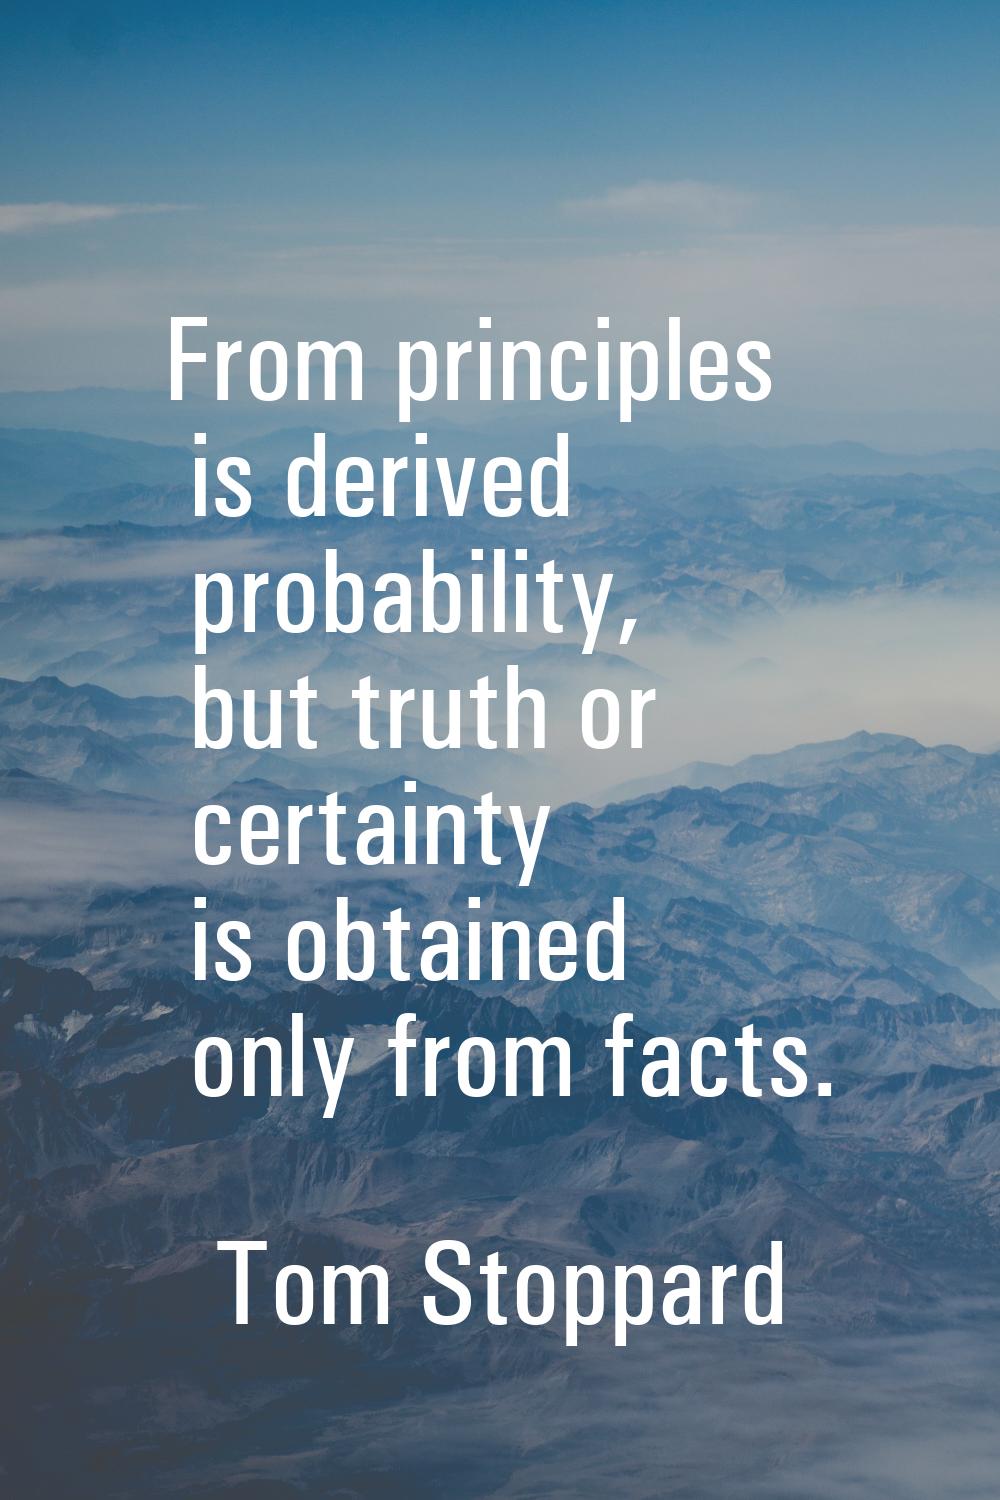 From principles is derived probability, but truth or certainty is obtained only from facts.